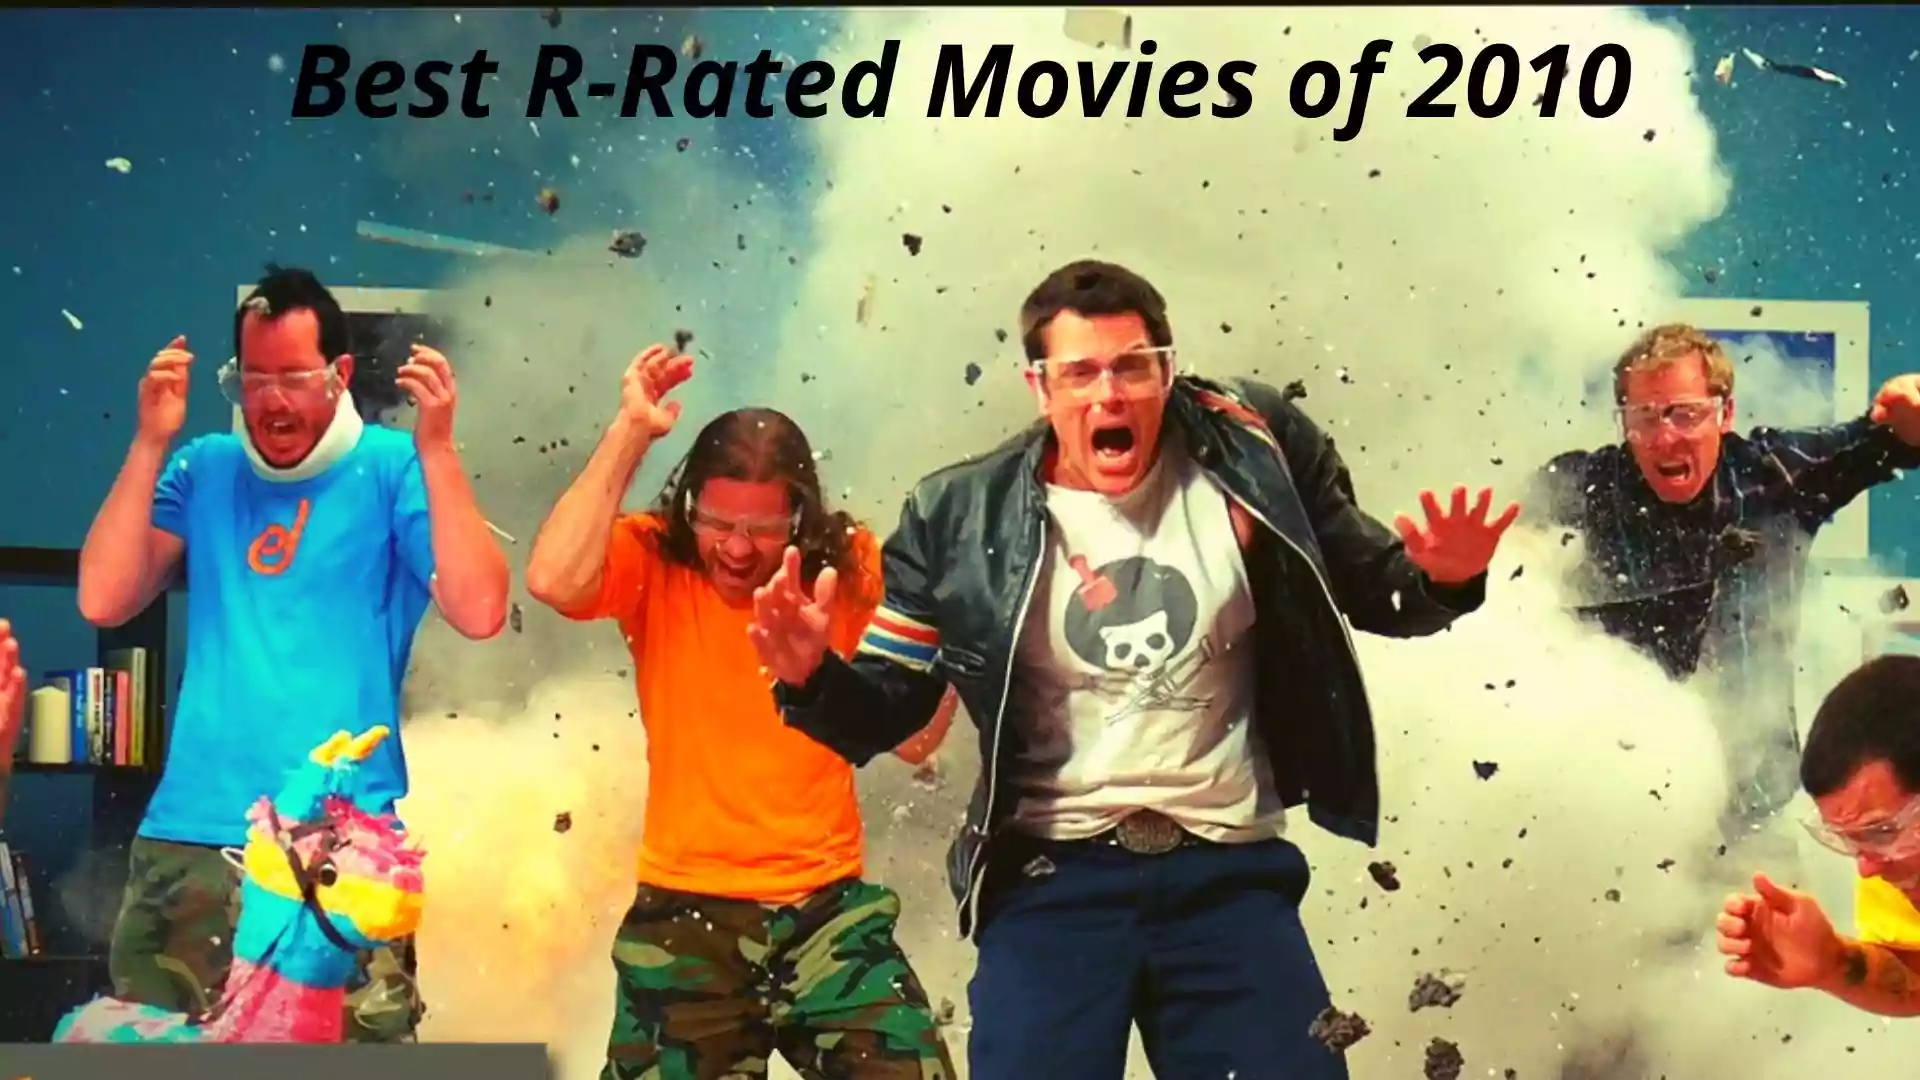 Best R-Rated Movies of 2010